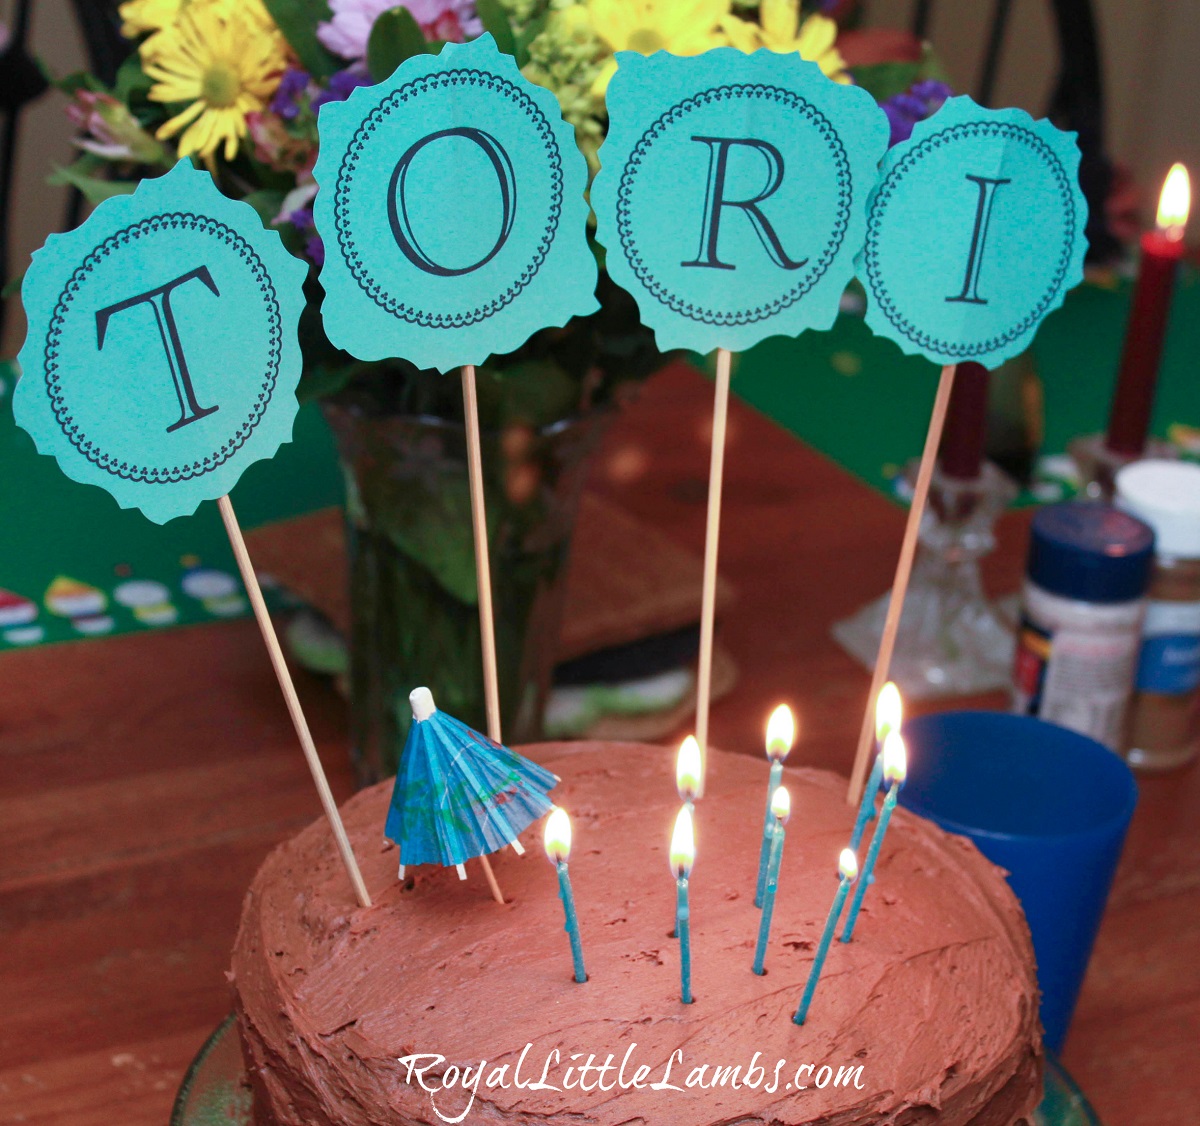 Chocolate Cake with Blue Decorations